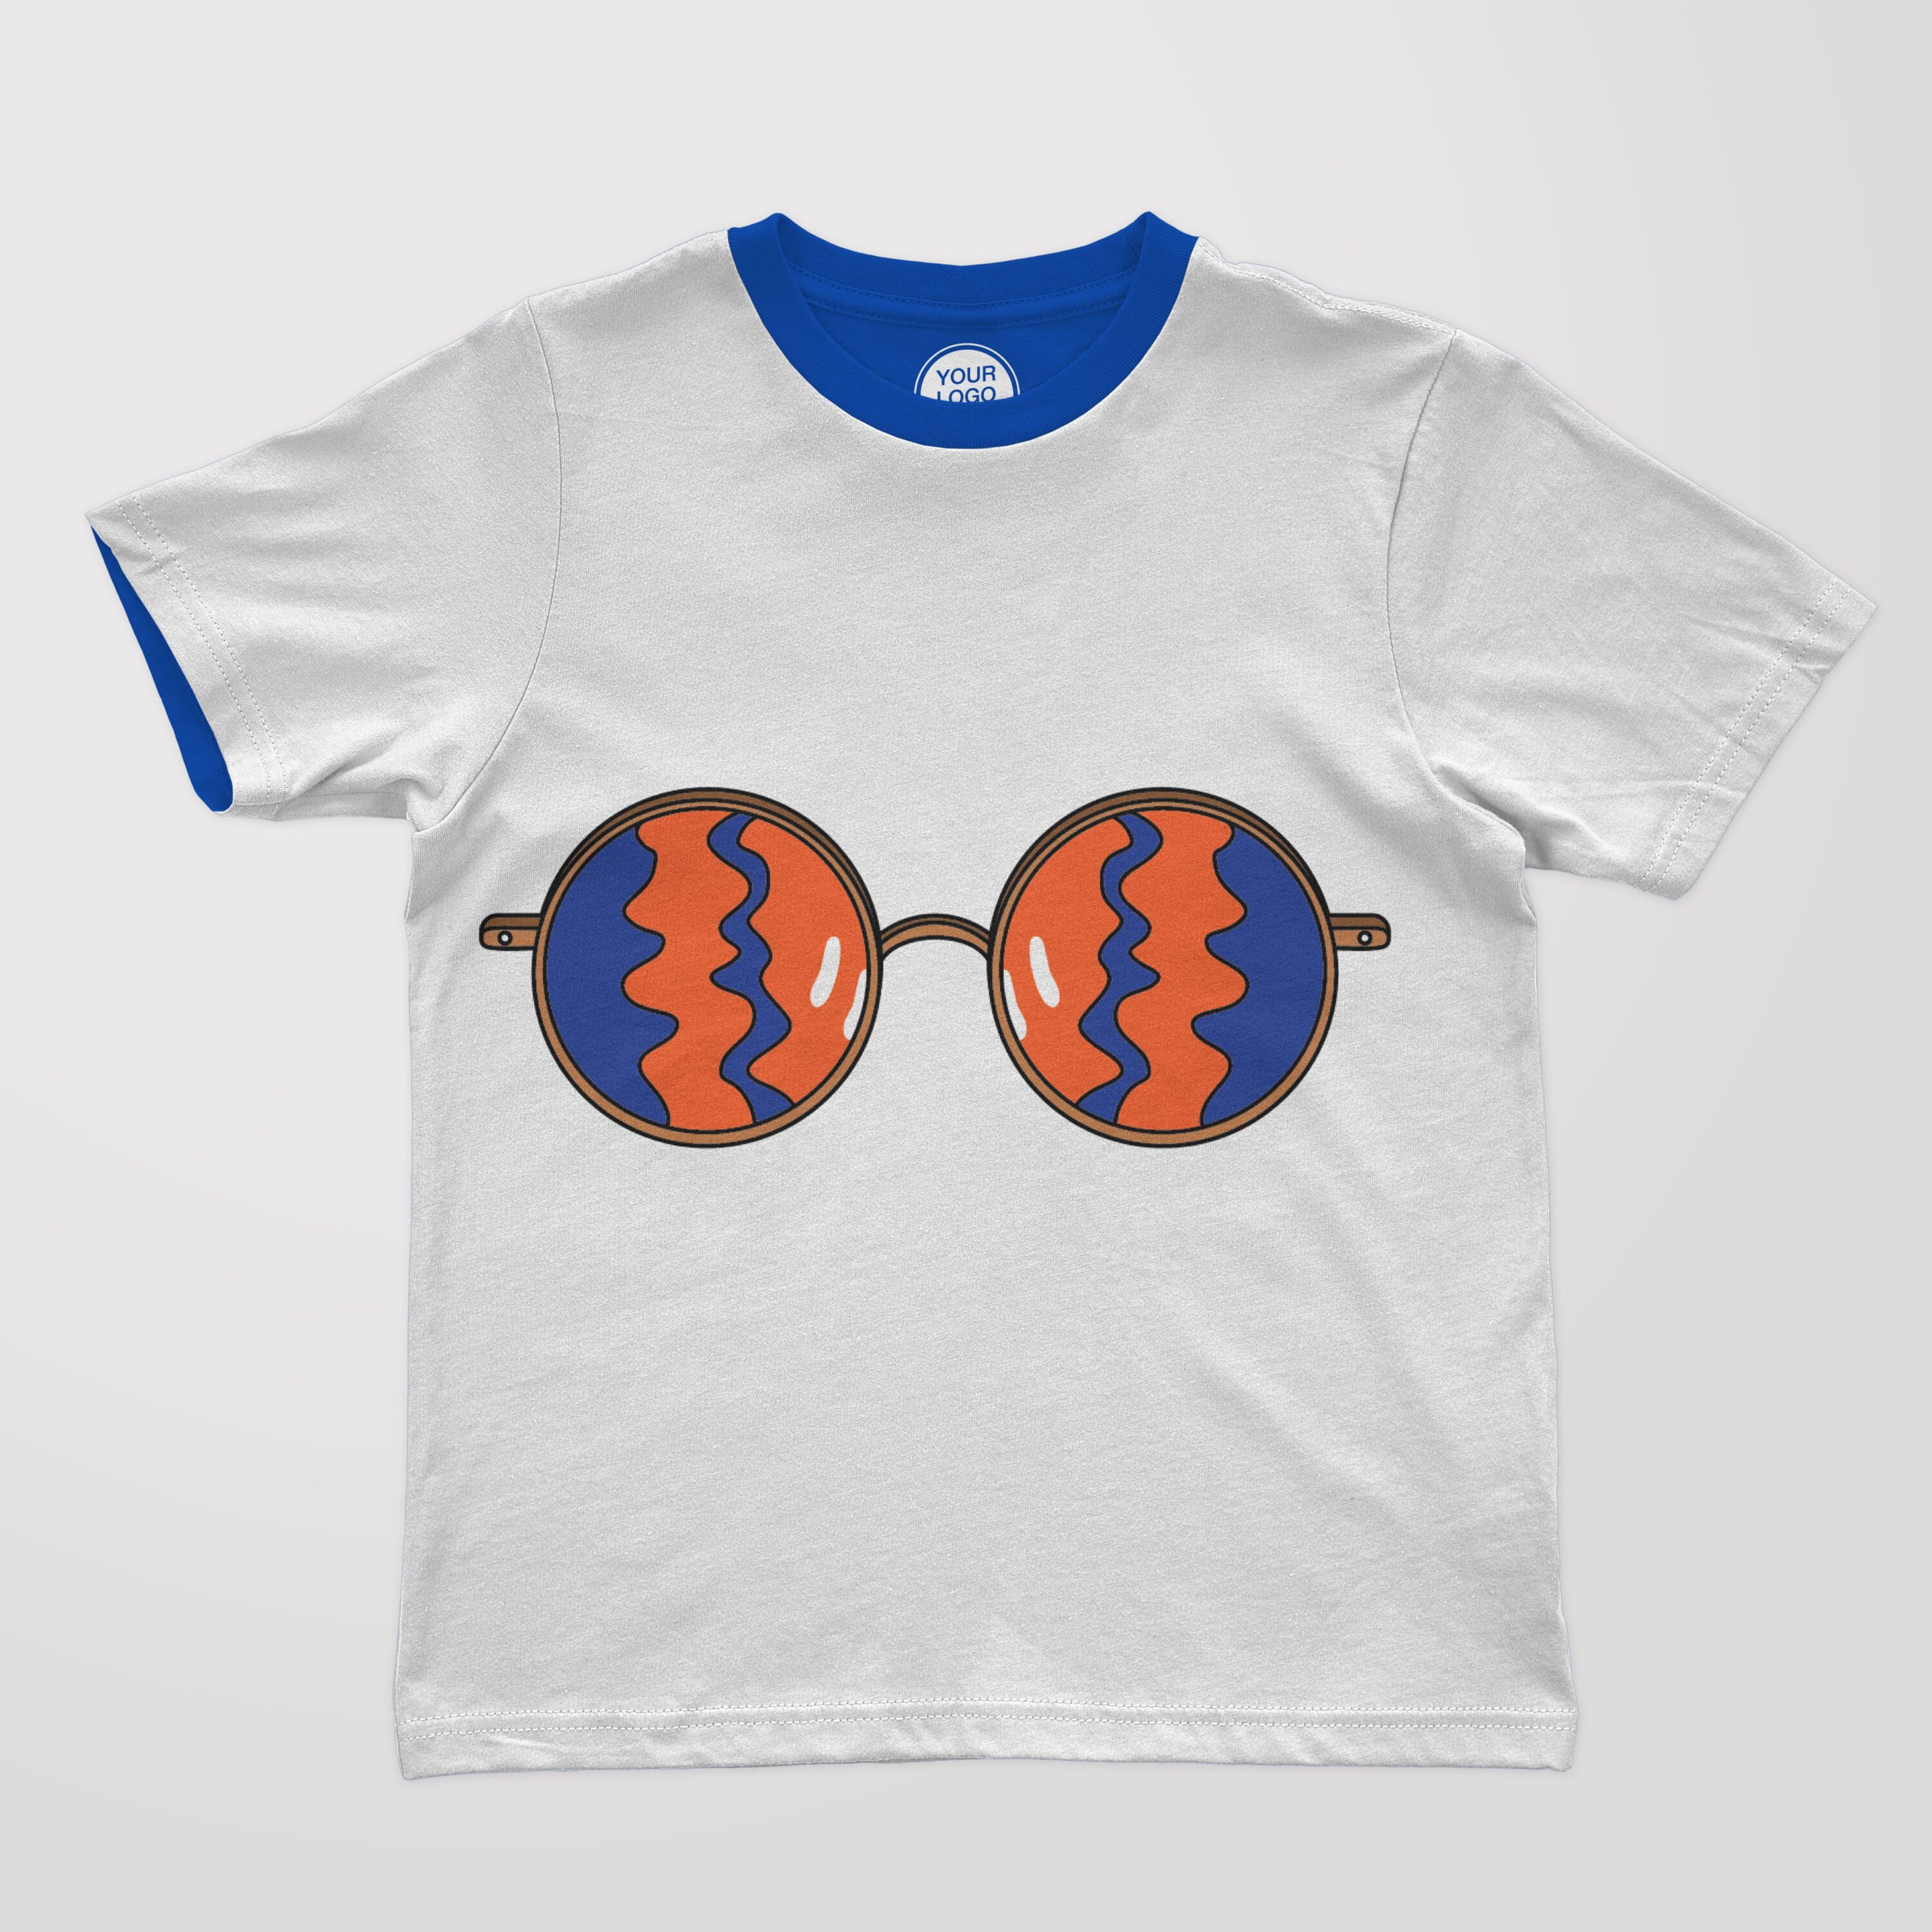 T-shirt design with printed hippie colorful sunglasses on it.